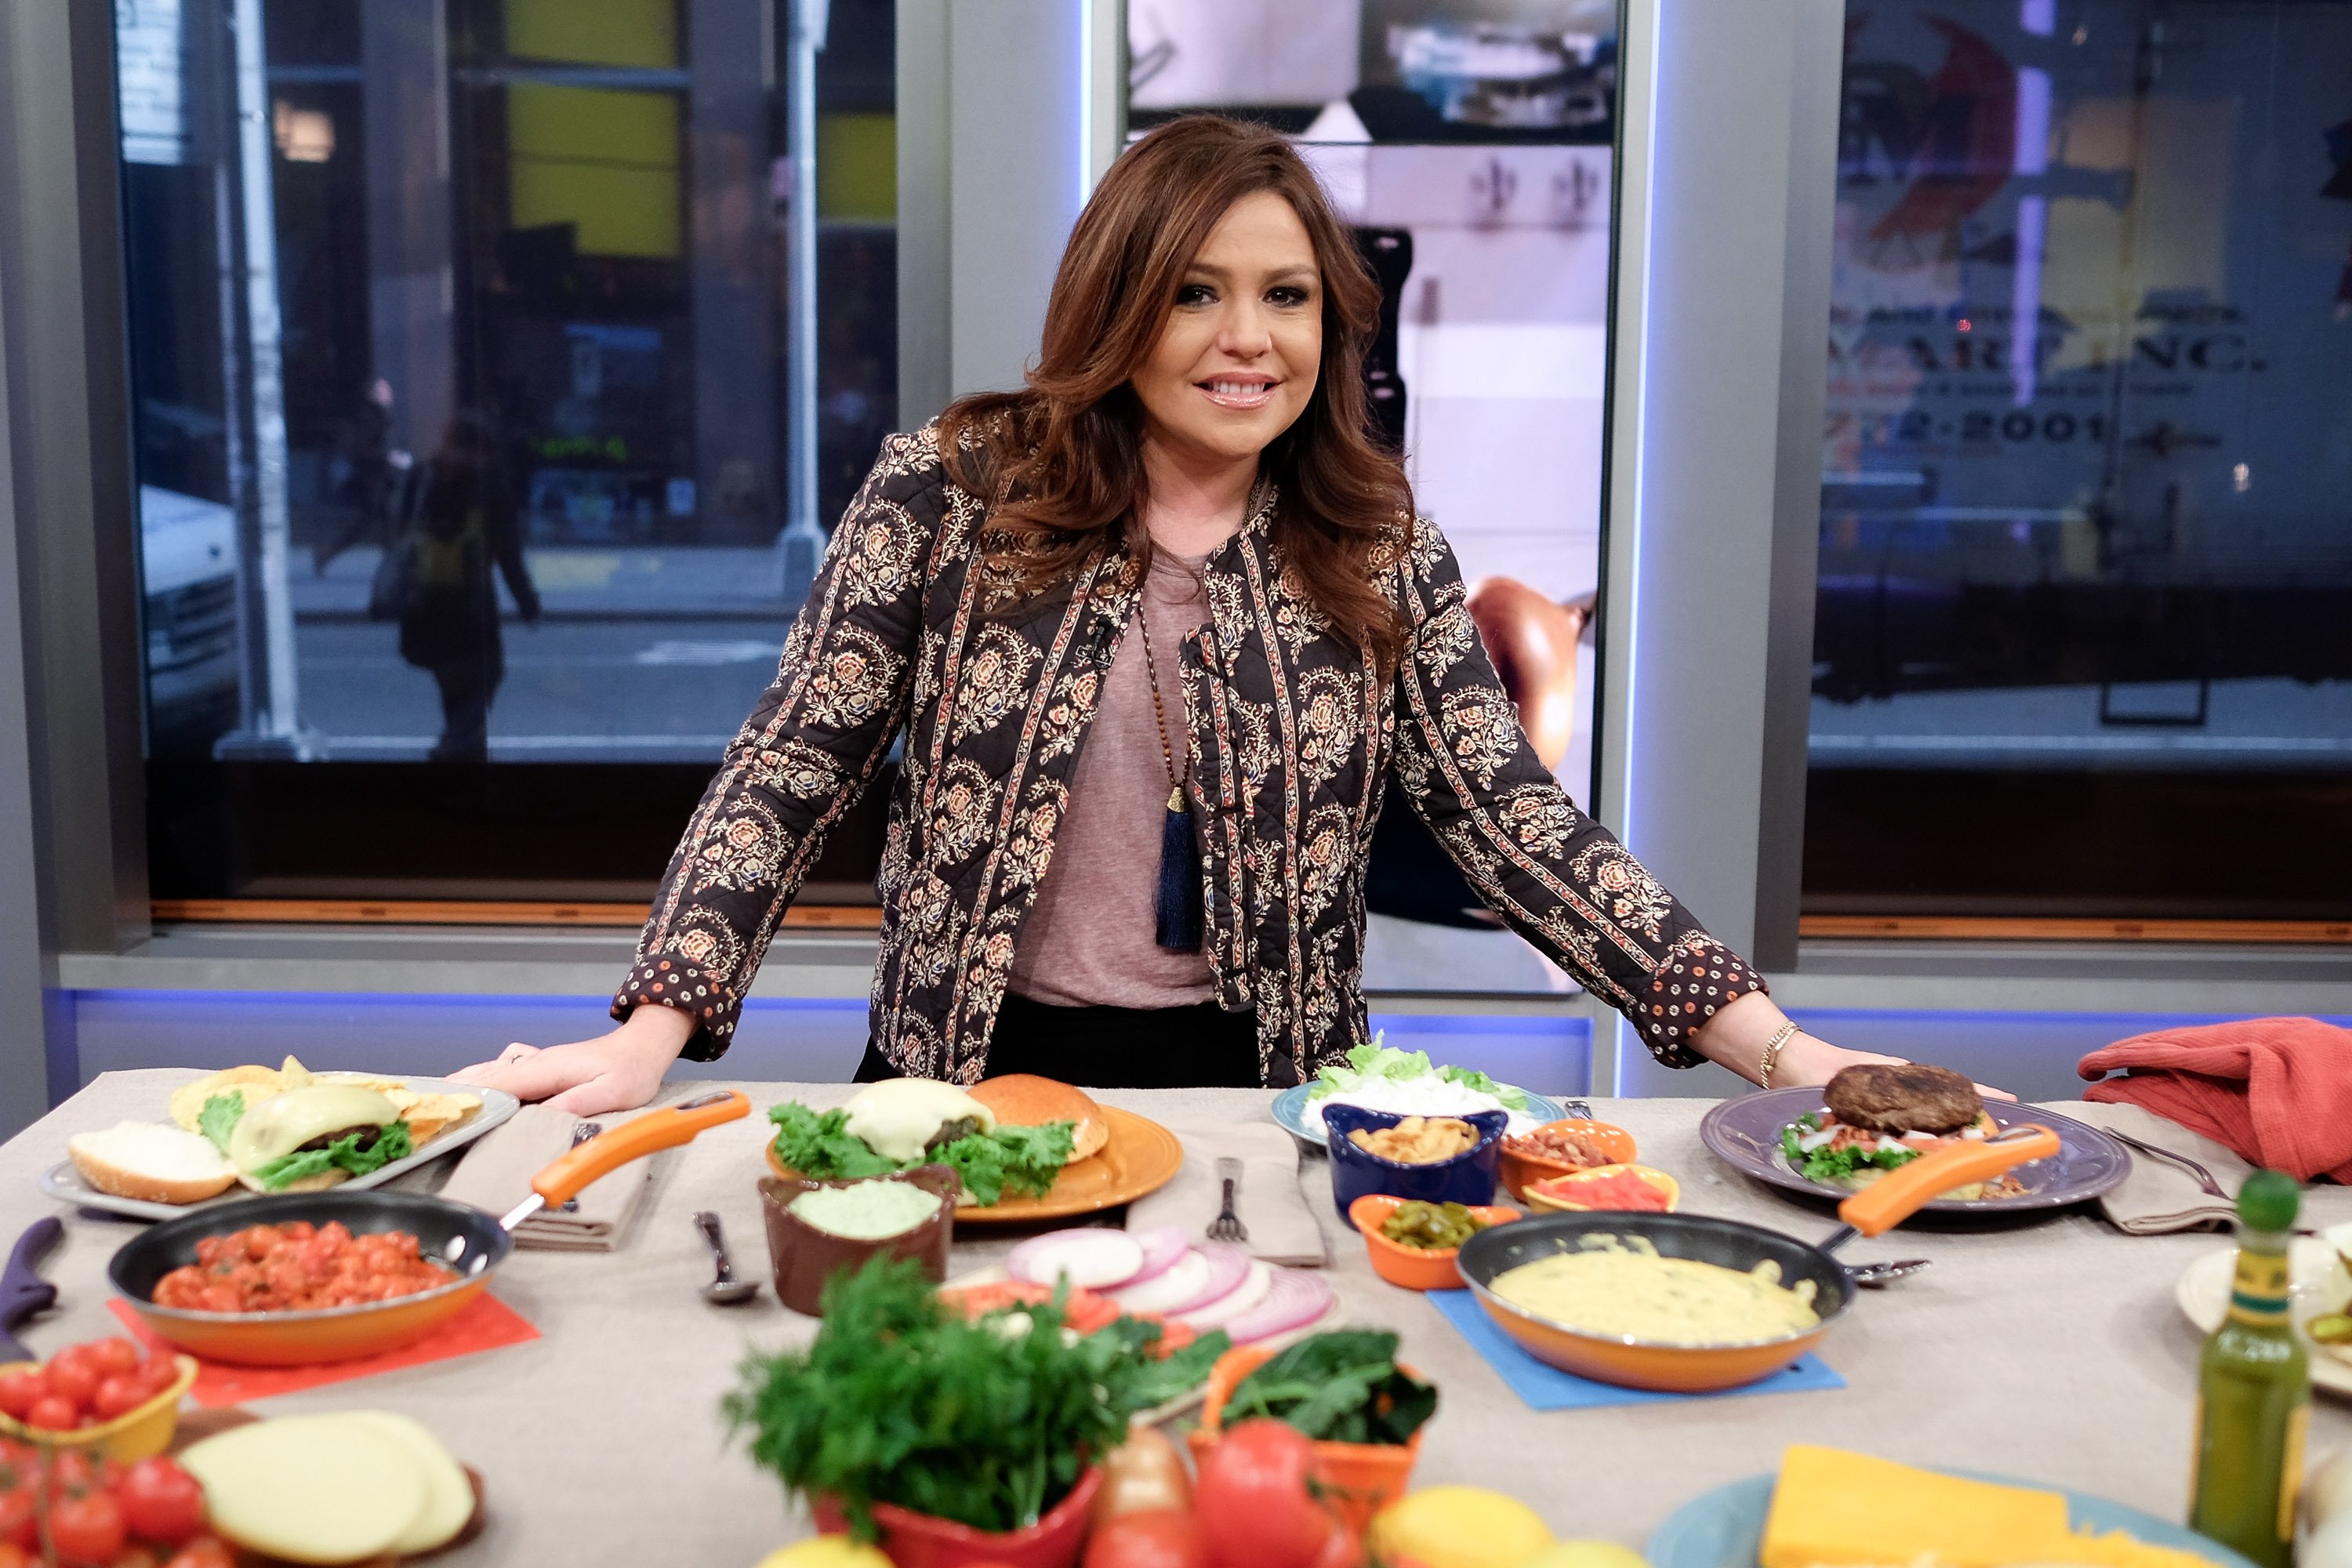 Rachael Ray standing behind table with food ingredients